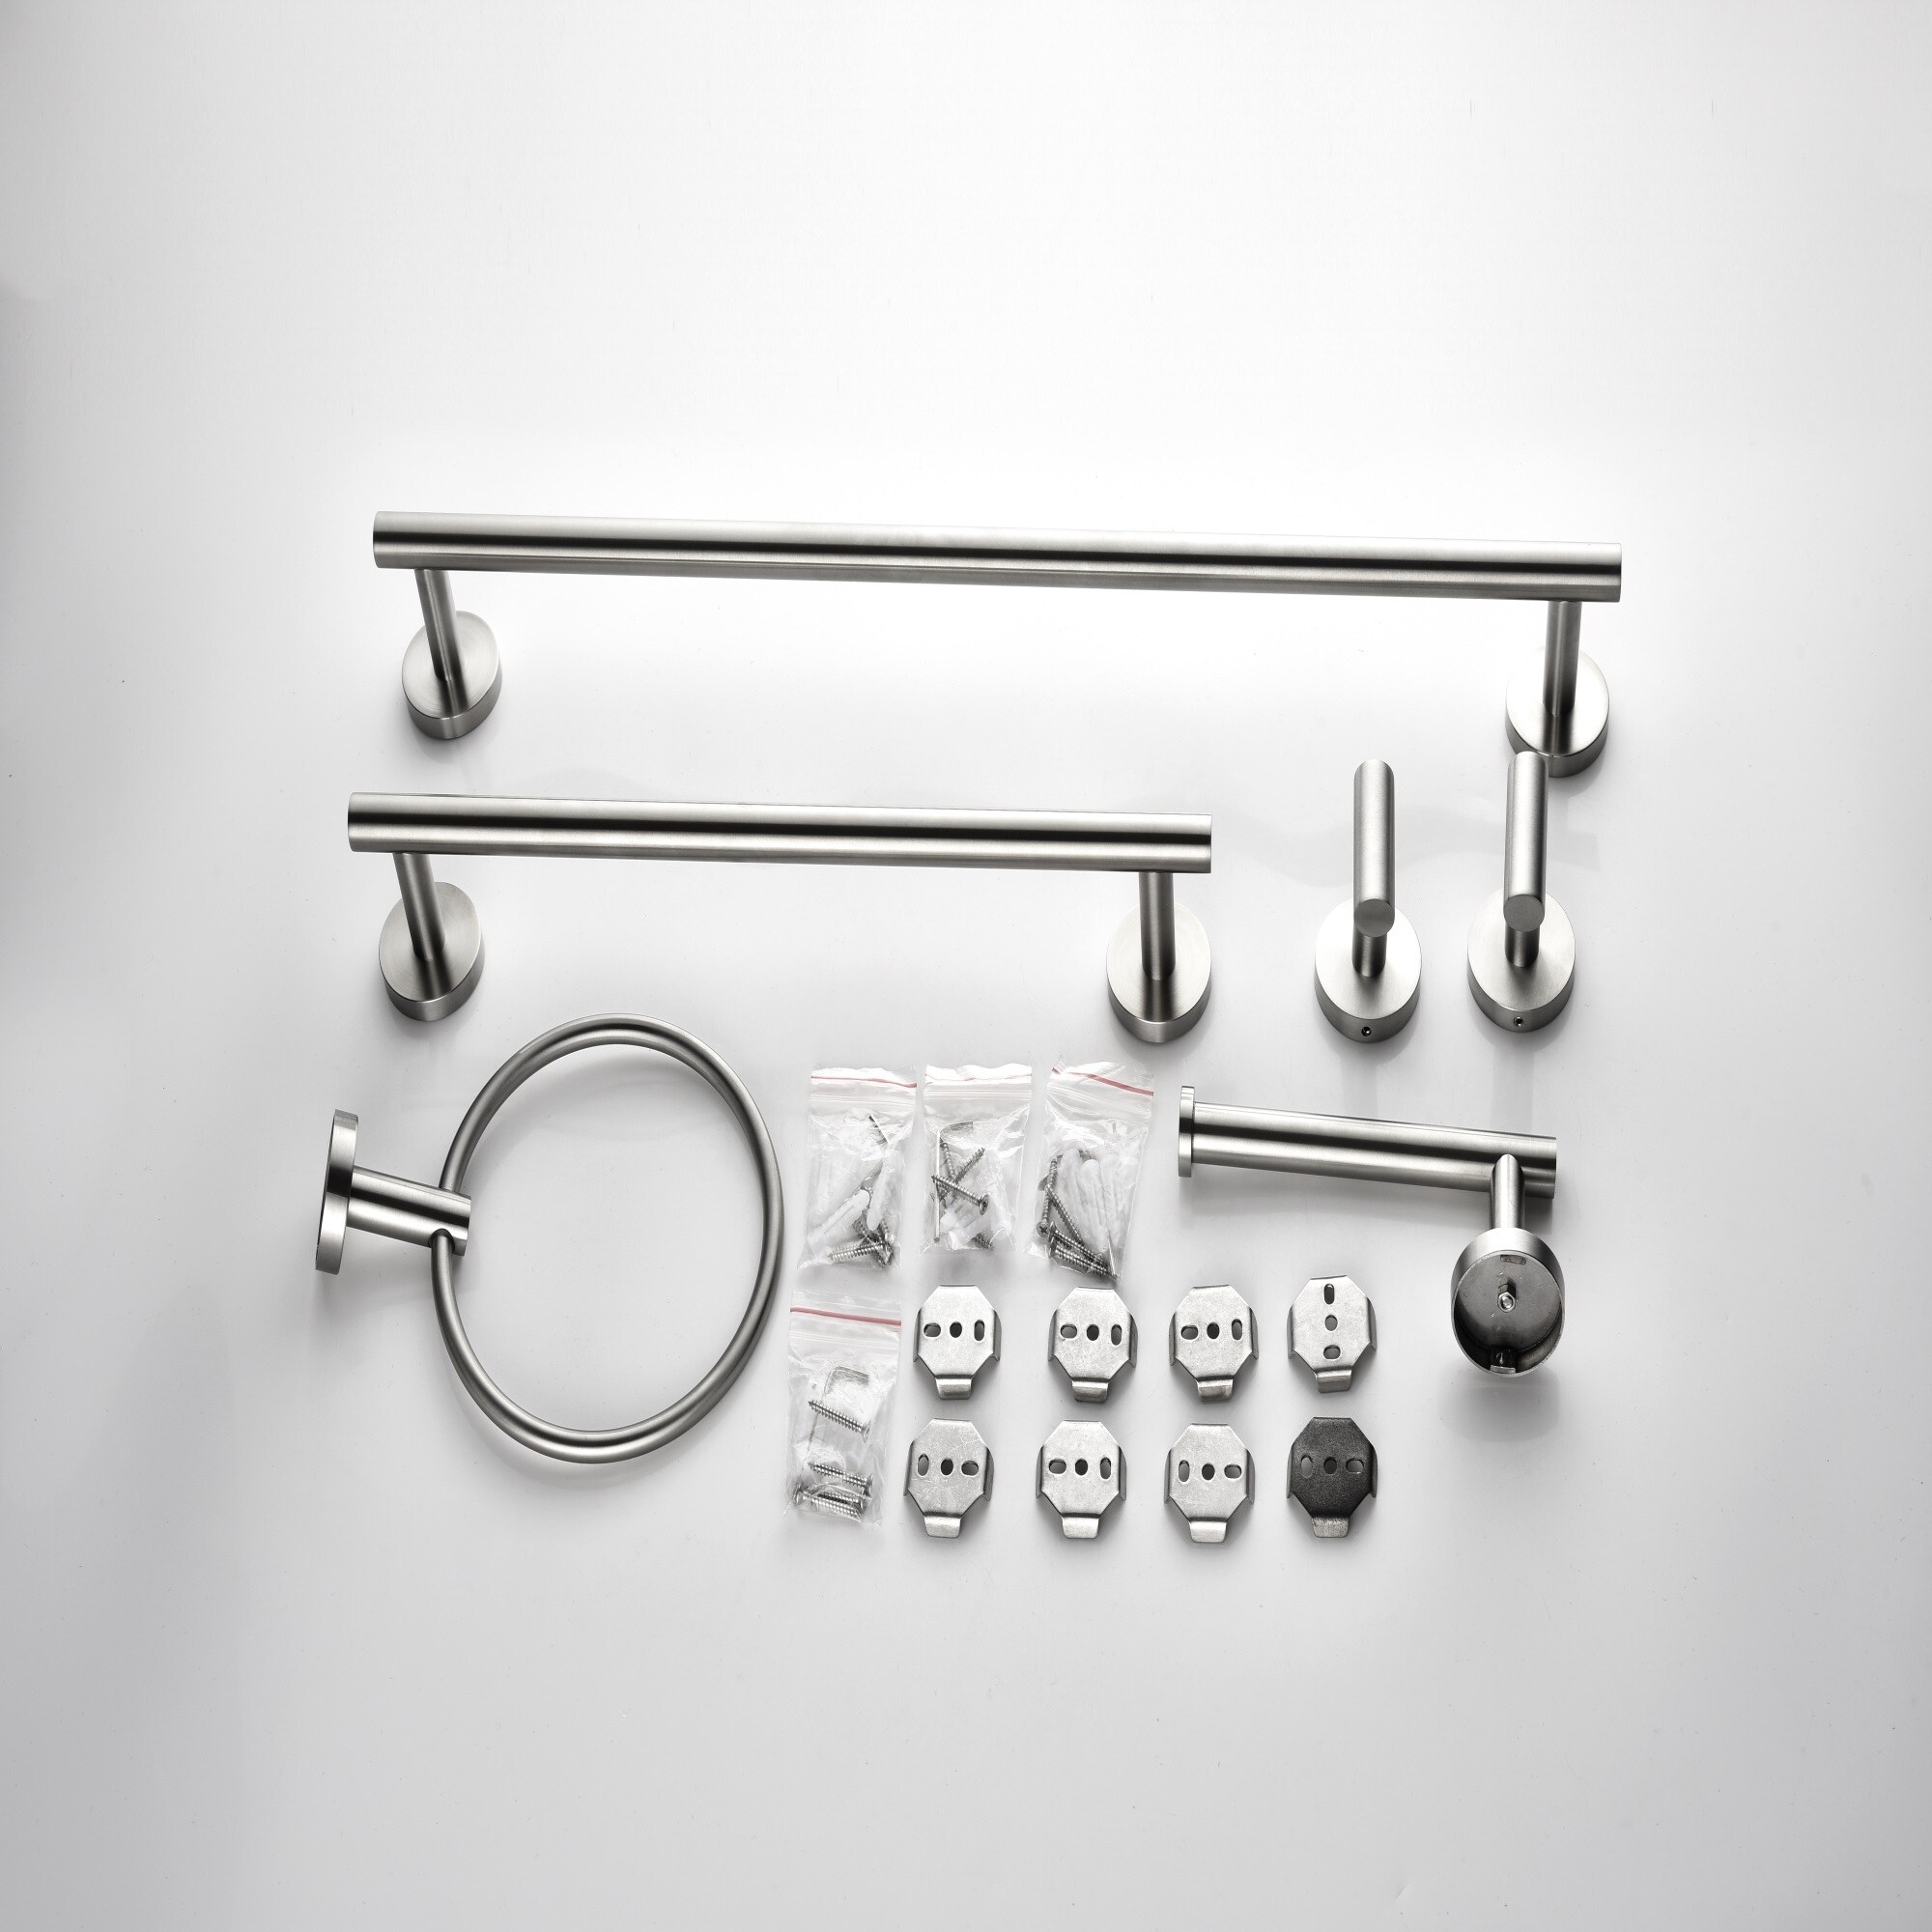 https://ak1.ostkcdn.com/images/products/is/images/direct/b3b37ec2afed4770dc6d09a3b7481d5792156f94/Bathroom-6-Piece-Stainless-Steel-Towel-Rack-Set-Wall-Mount.jpg